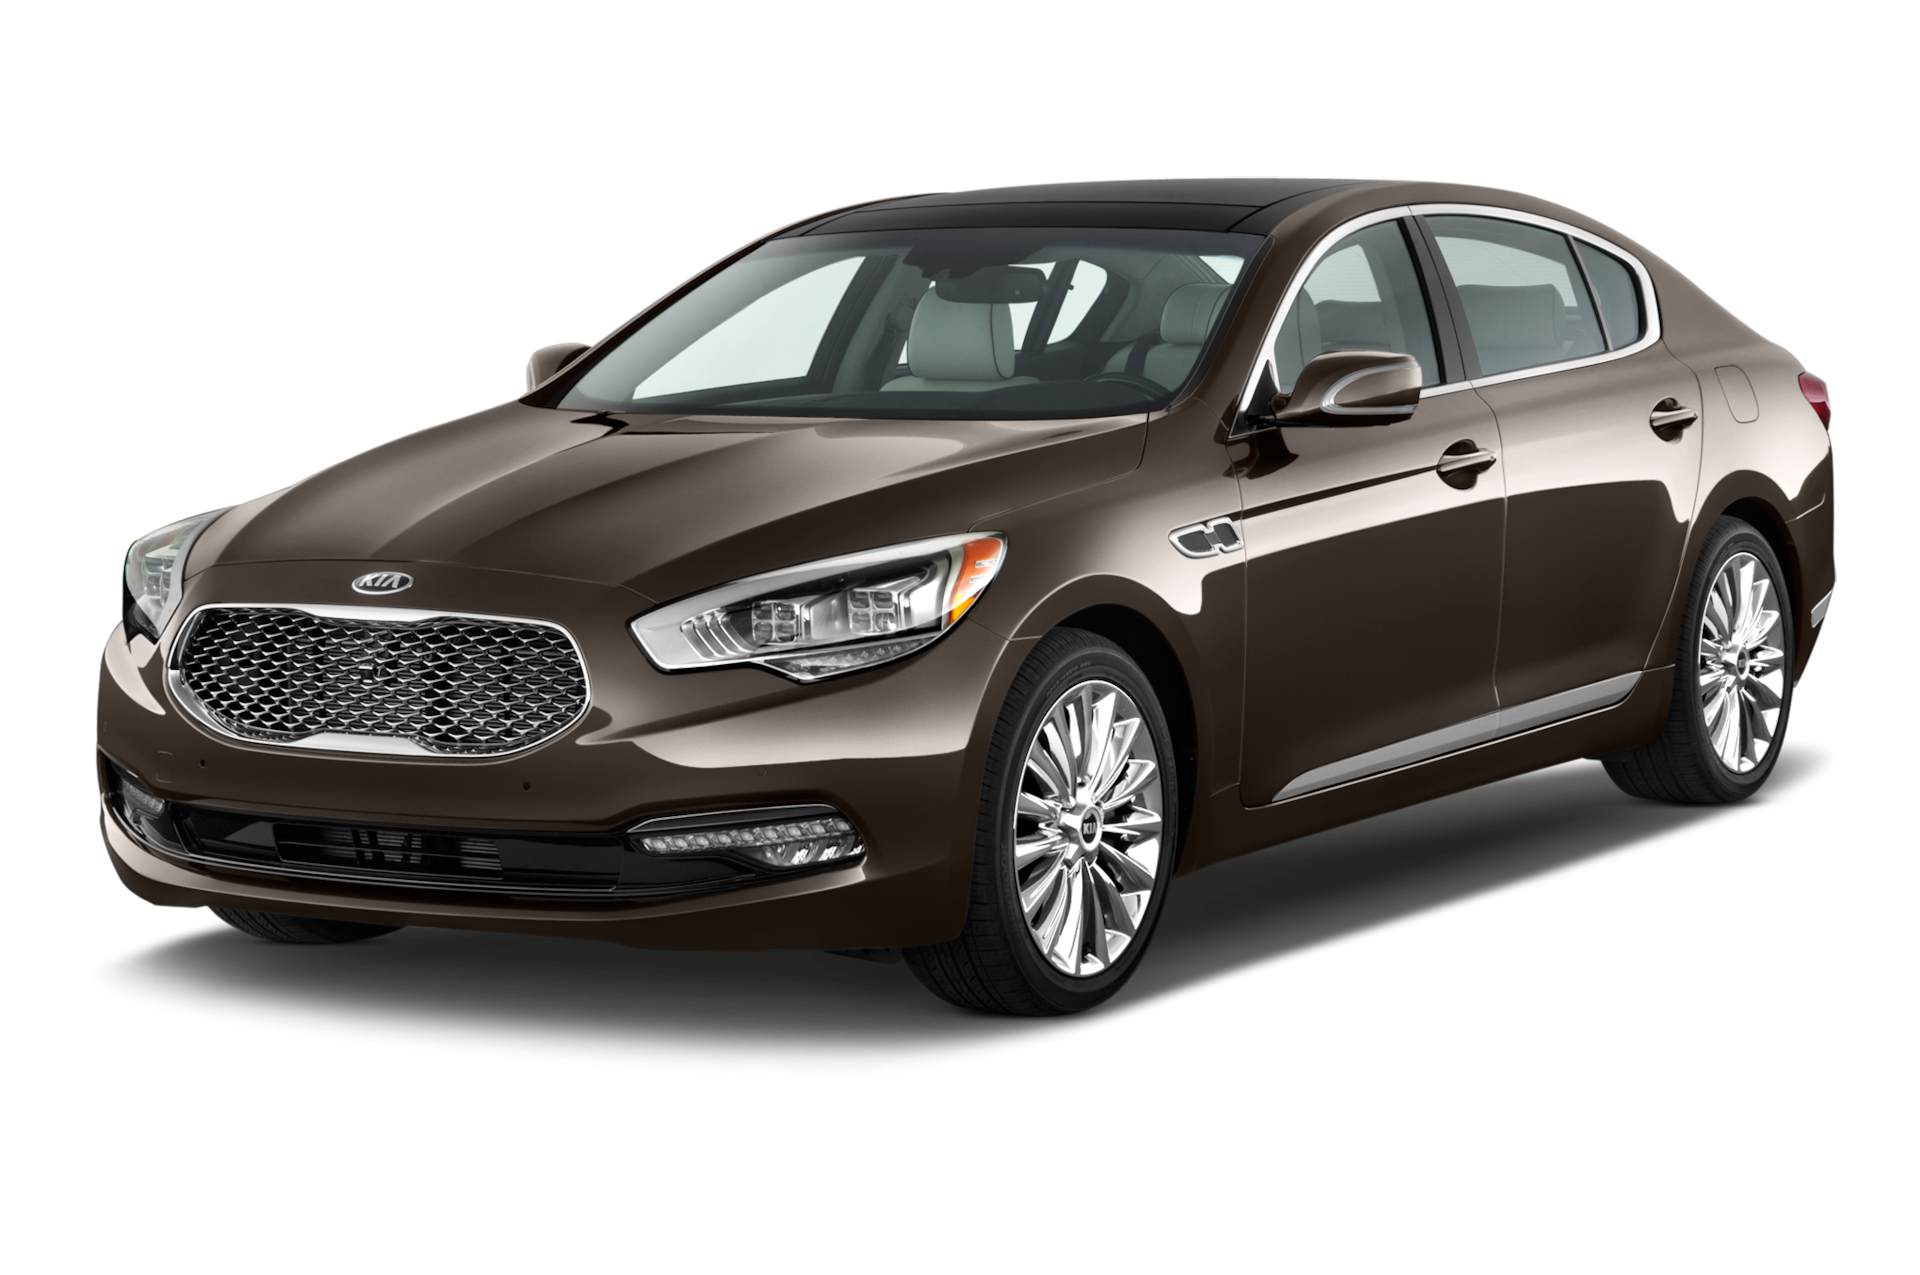 2015 Kia K900 Prices, Reviews, and Photos - MotorTrend